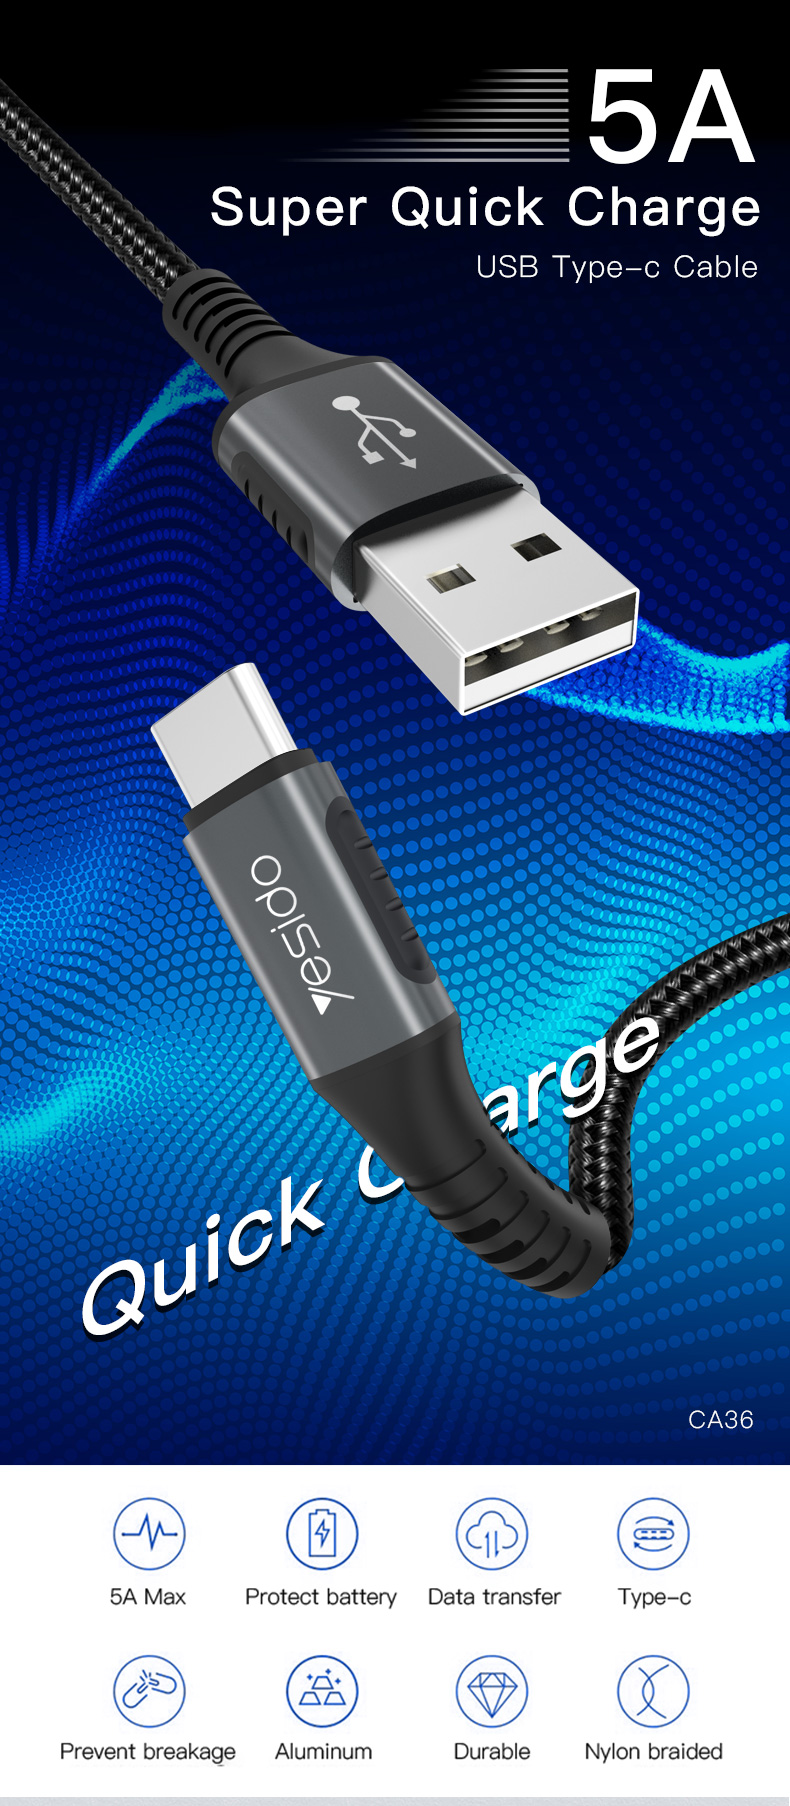 Yesido CA36 5A USB Type-C Data Cable QC3.0 Super Quick Charge Data Sync Cord Line For Samsung Galaxy Note 20 Huawei P40 Mi10